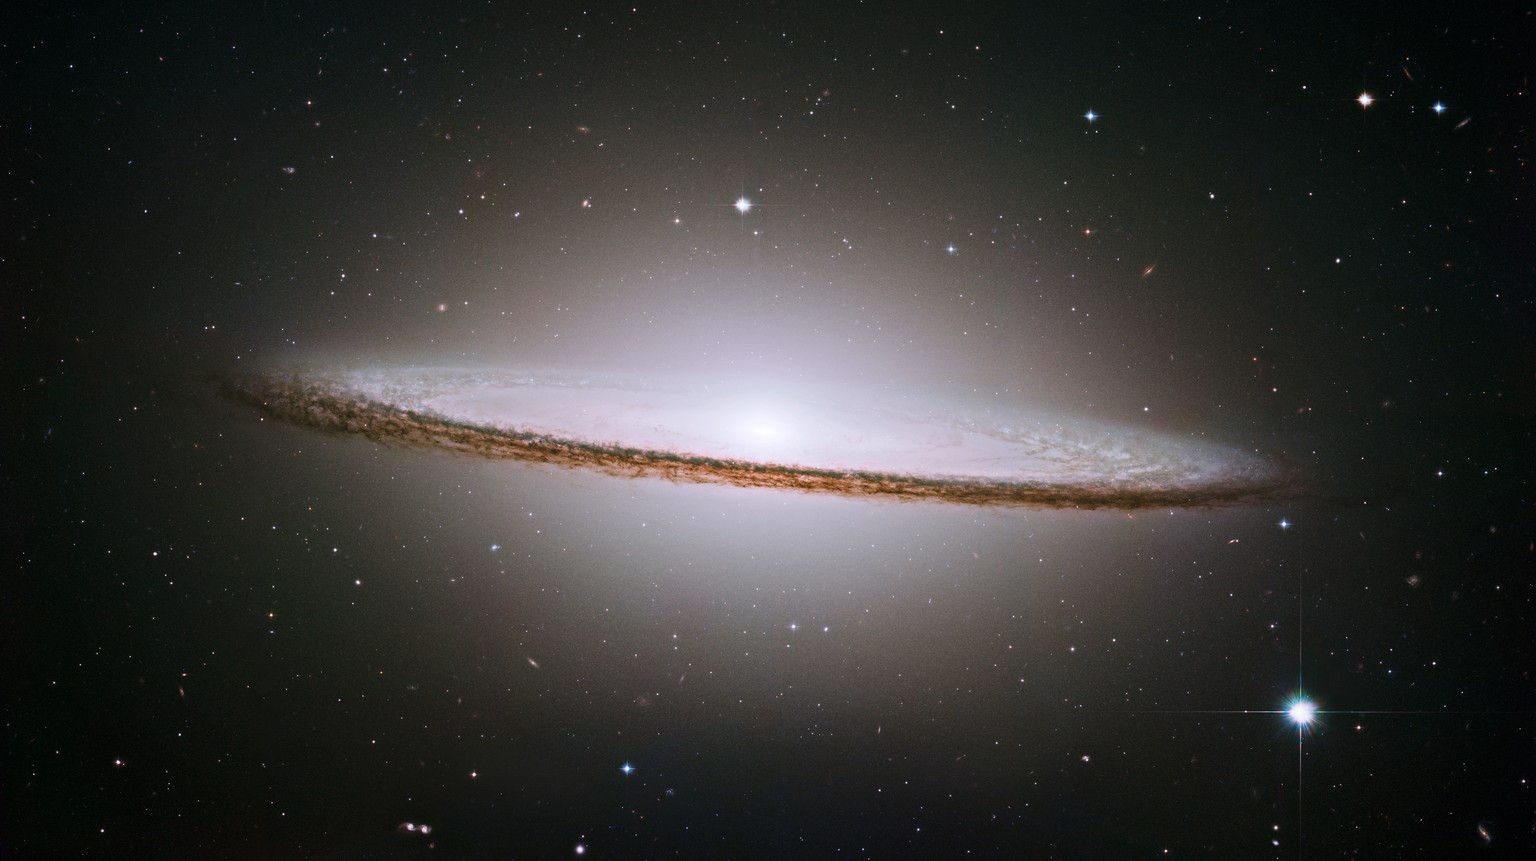 NASA/ESA Hubble Space Telescope has trained its razor-sharp eye on one of the universe&#039;s most stately and photogenic galaxies, the Sombrero galaxy, Messier 104 (M104). The galaxy&#039;s hallmark  ...